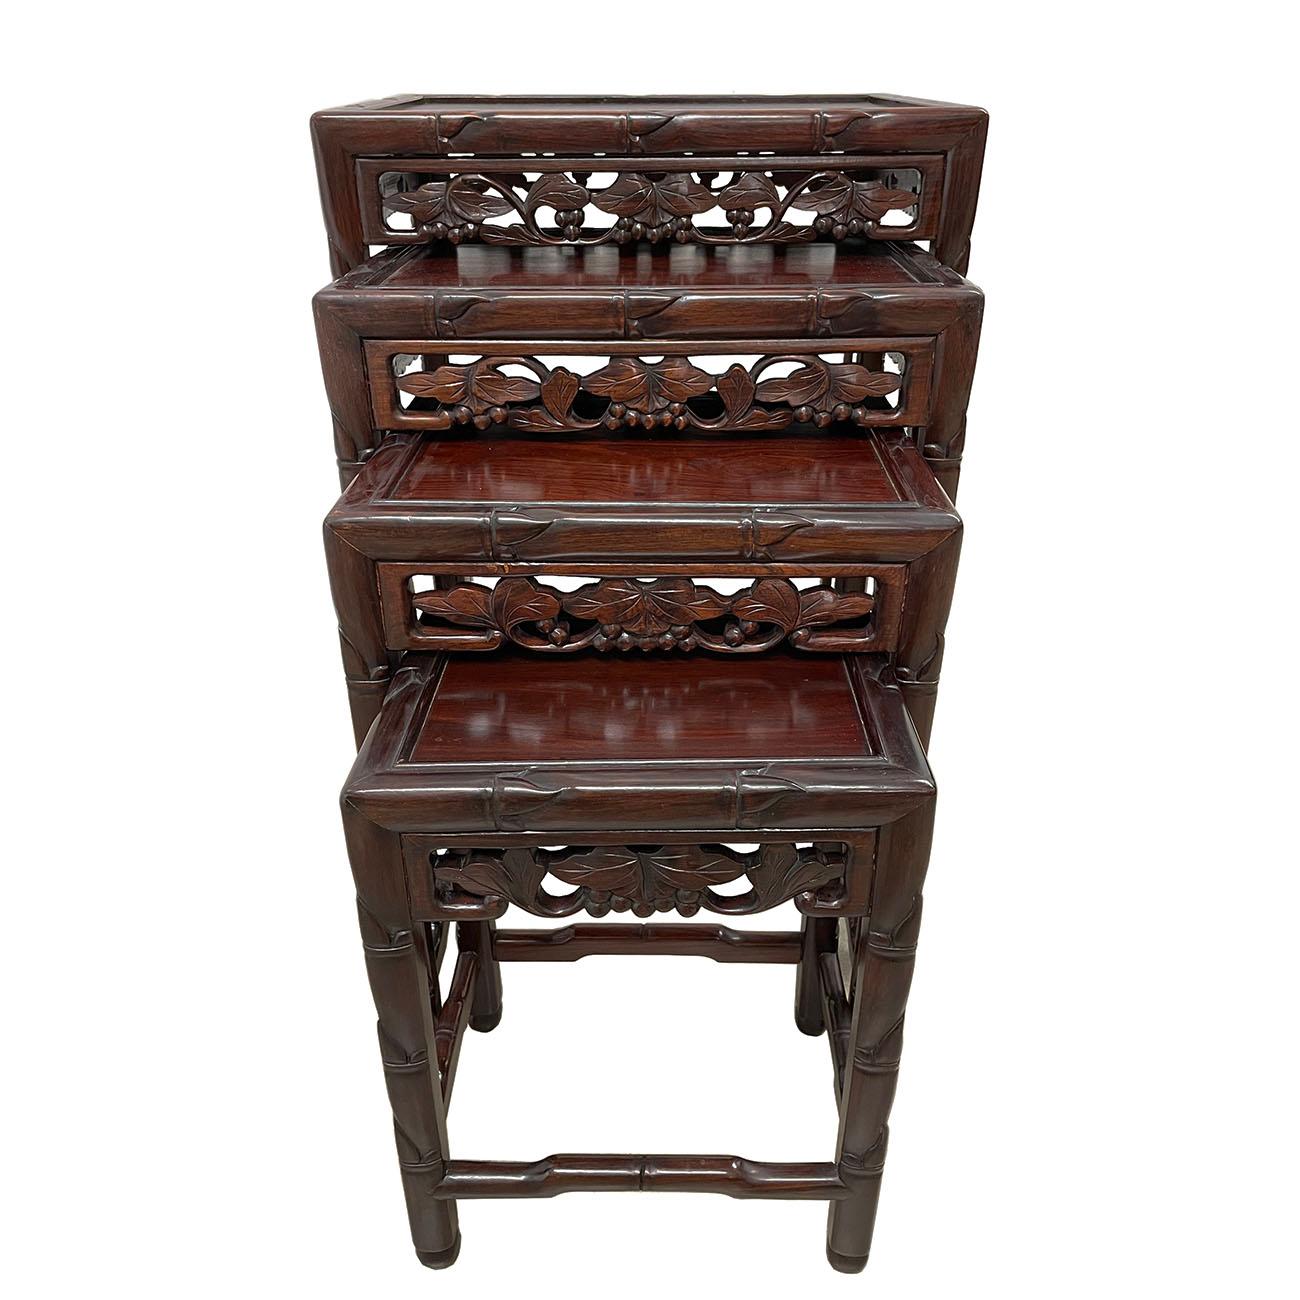 This set of gorgeous Chinese Antique Carved Rosewood Nesting Table were made from solid Rosewood with traditional carving works on all four sides and legs for each table. There are set of 4 tables total. Full of patina. From the pictures, you can